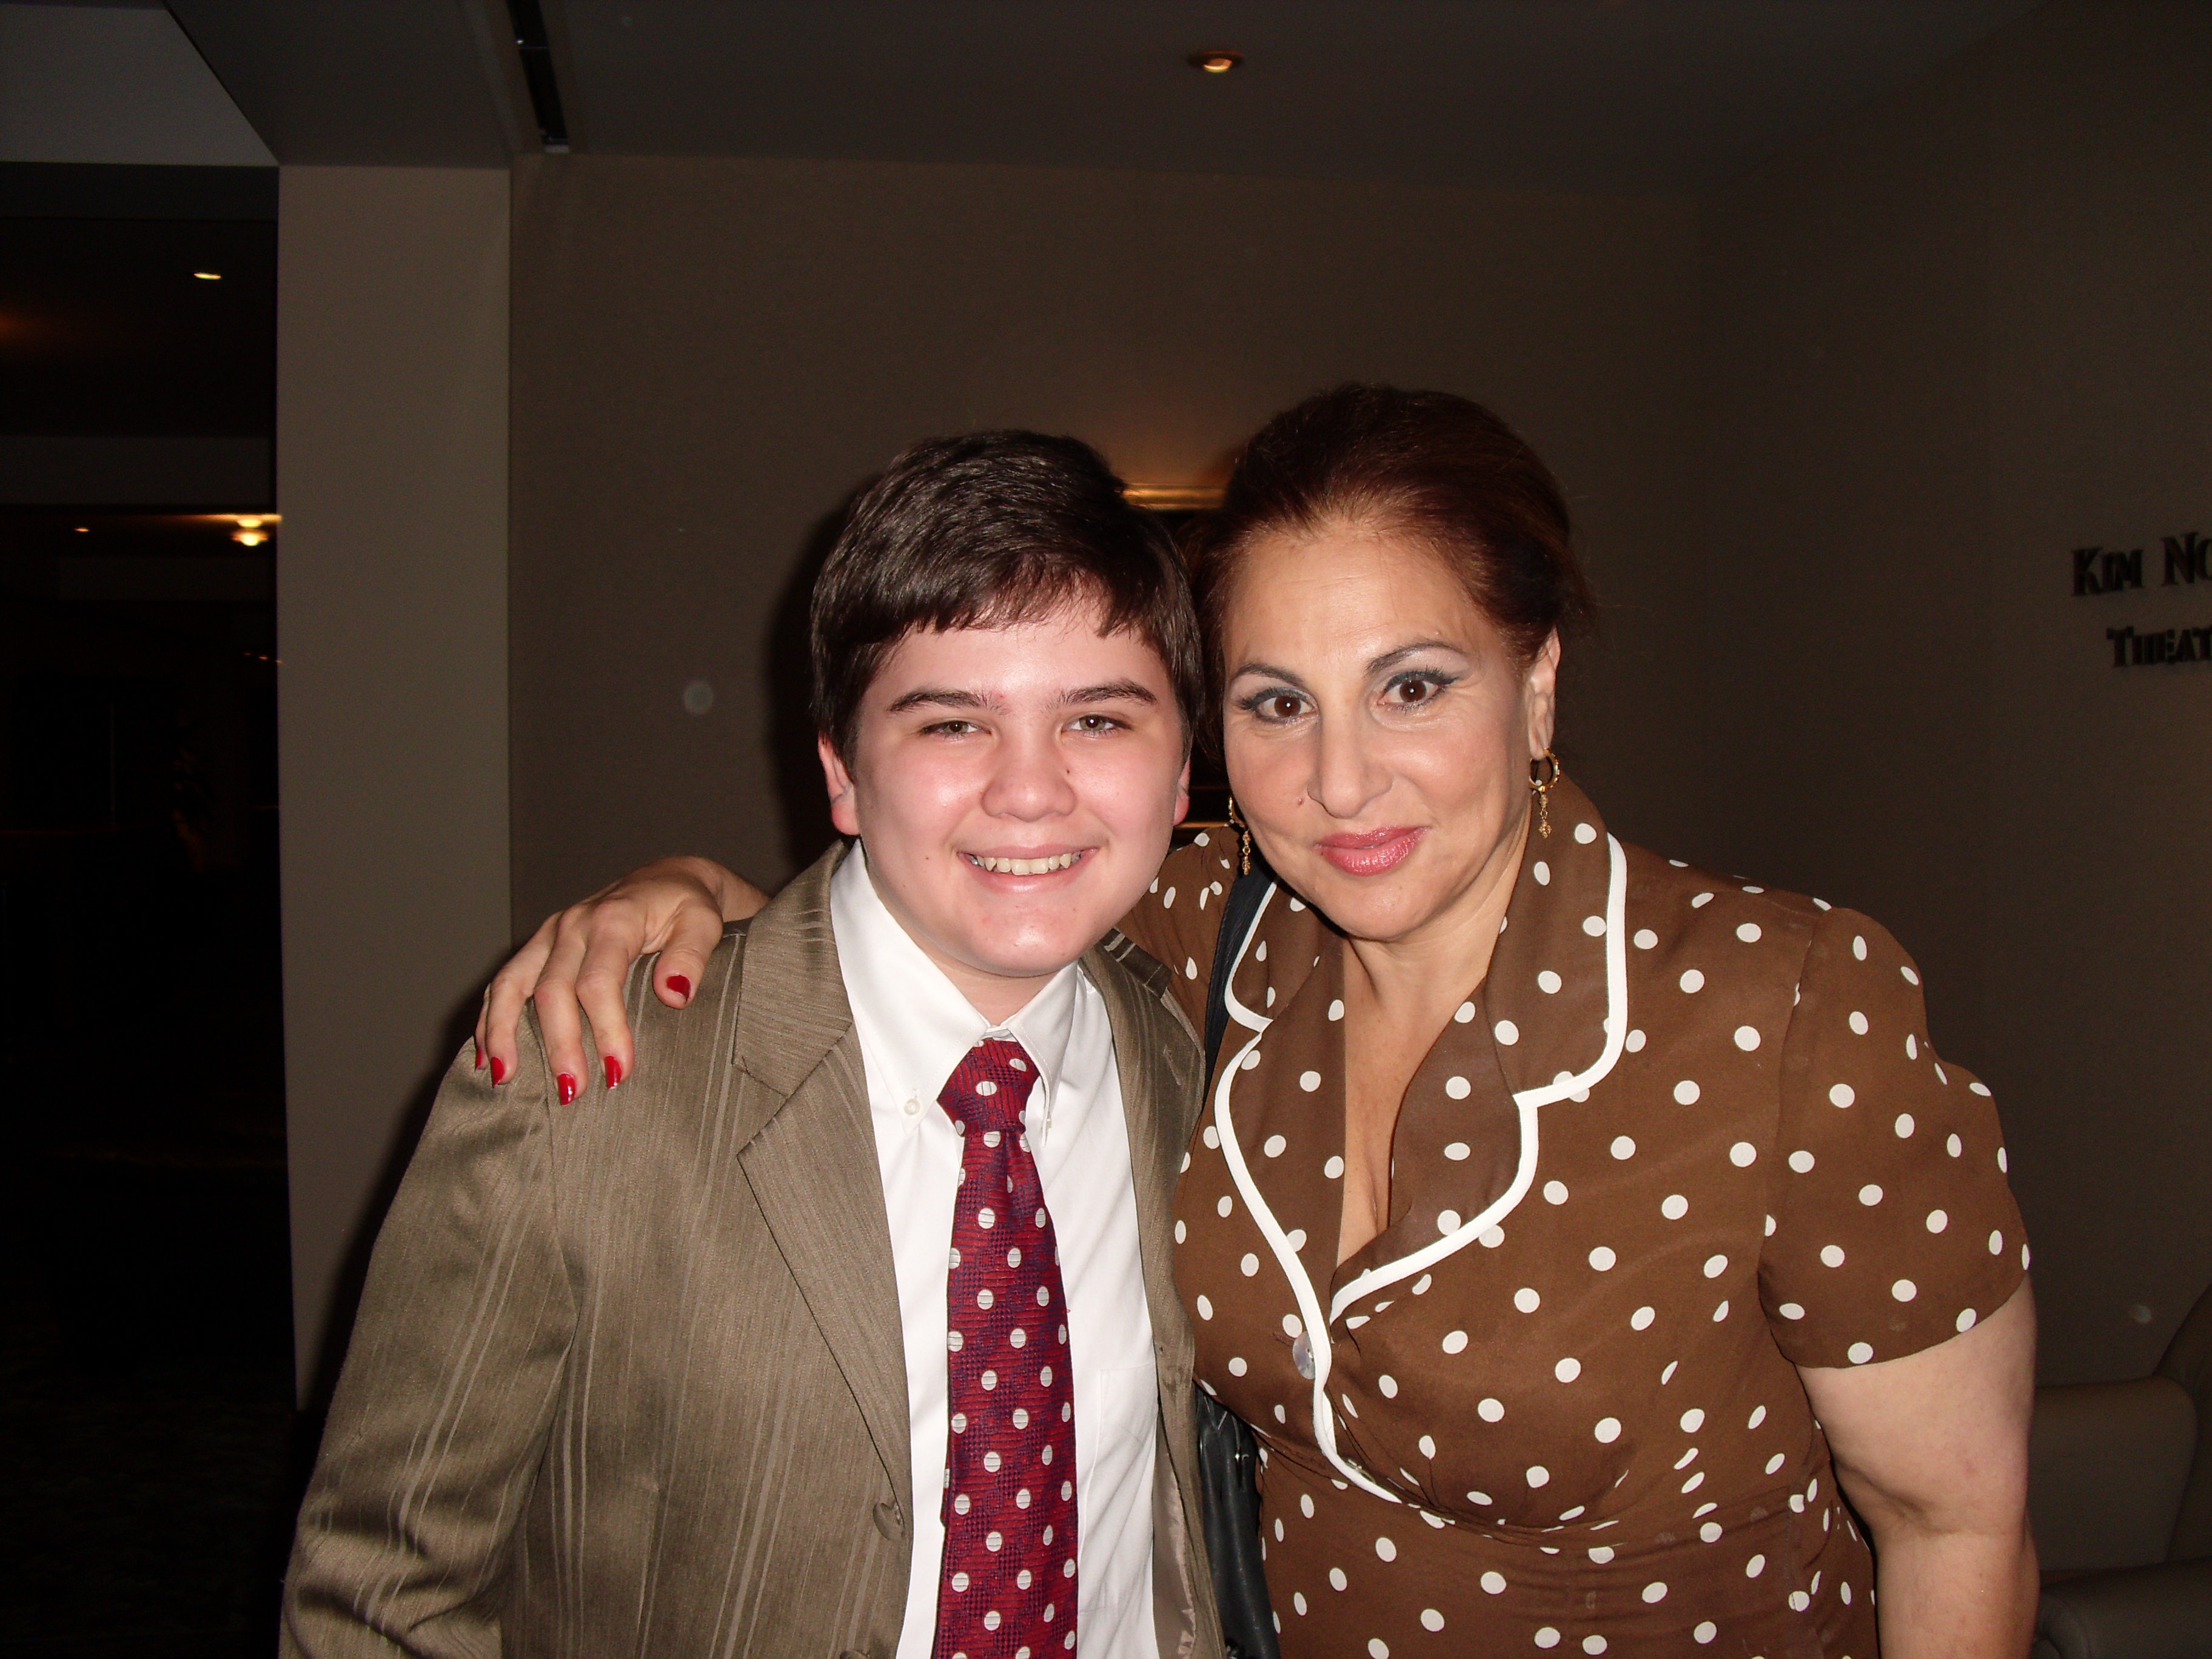 Sean Patrick Flaherty and Kathy Najimy on the set of Not Your Time.